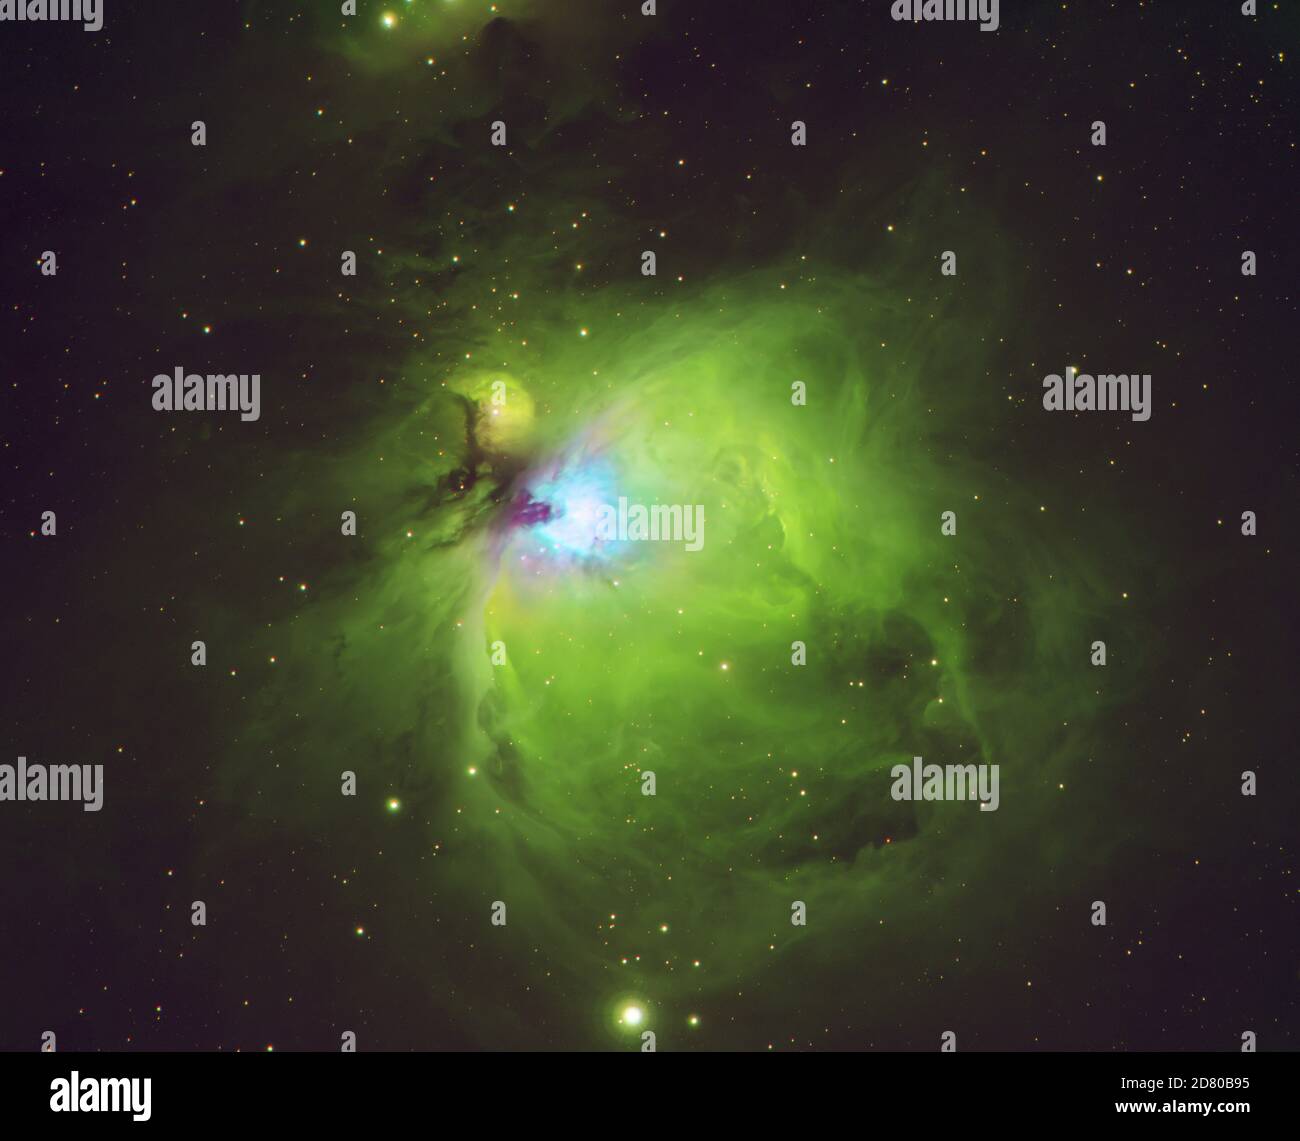 London, UK. October 2020. Narrowband image of the Orion Nebula using  filters to pick up Hydrogen and Oxygen III emission regions of this vast gas cloud 1344 light years from Earth. Exposure time 2.5 hours taken with a filtered monochrome astrophotography camera cooled to -15 degrees. Credit: Malcolm Park/Alamy. Stock Photo